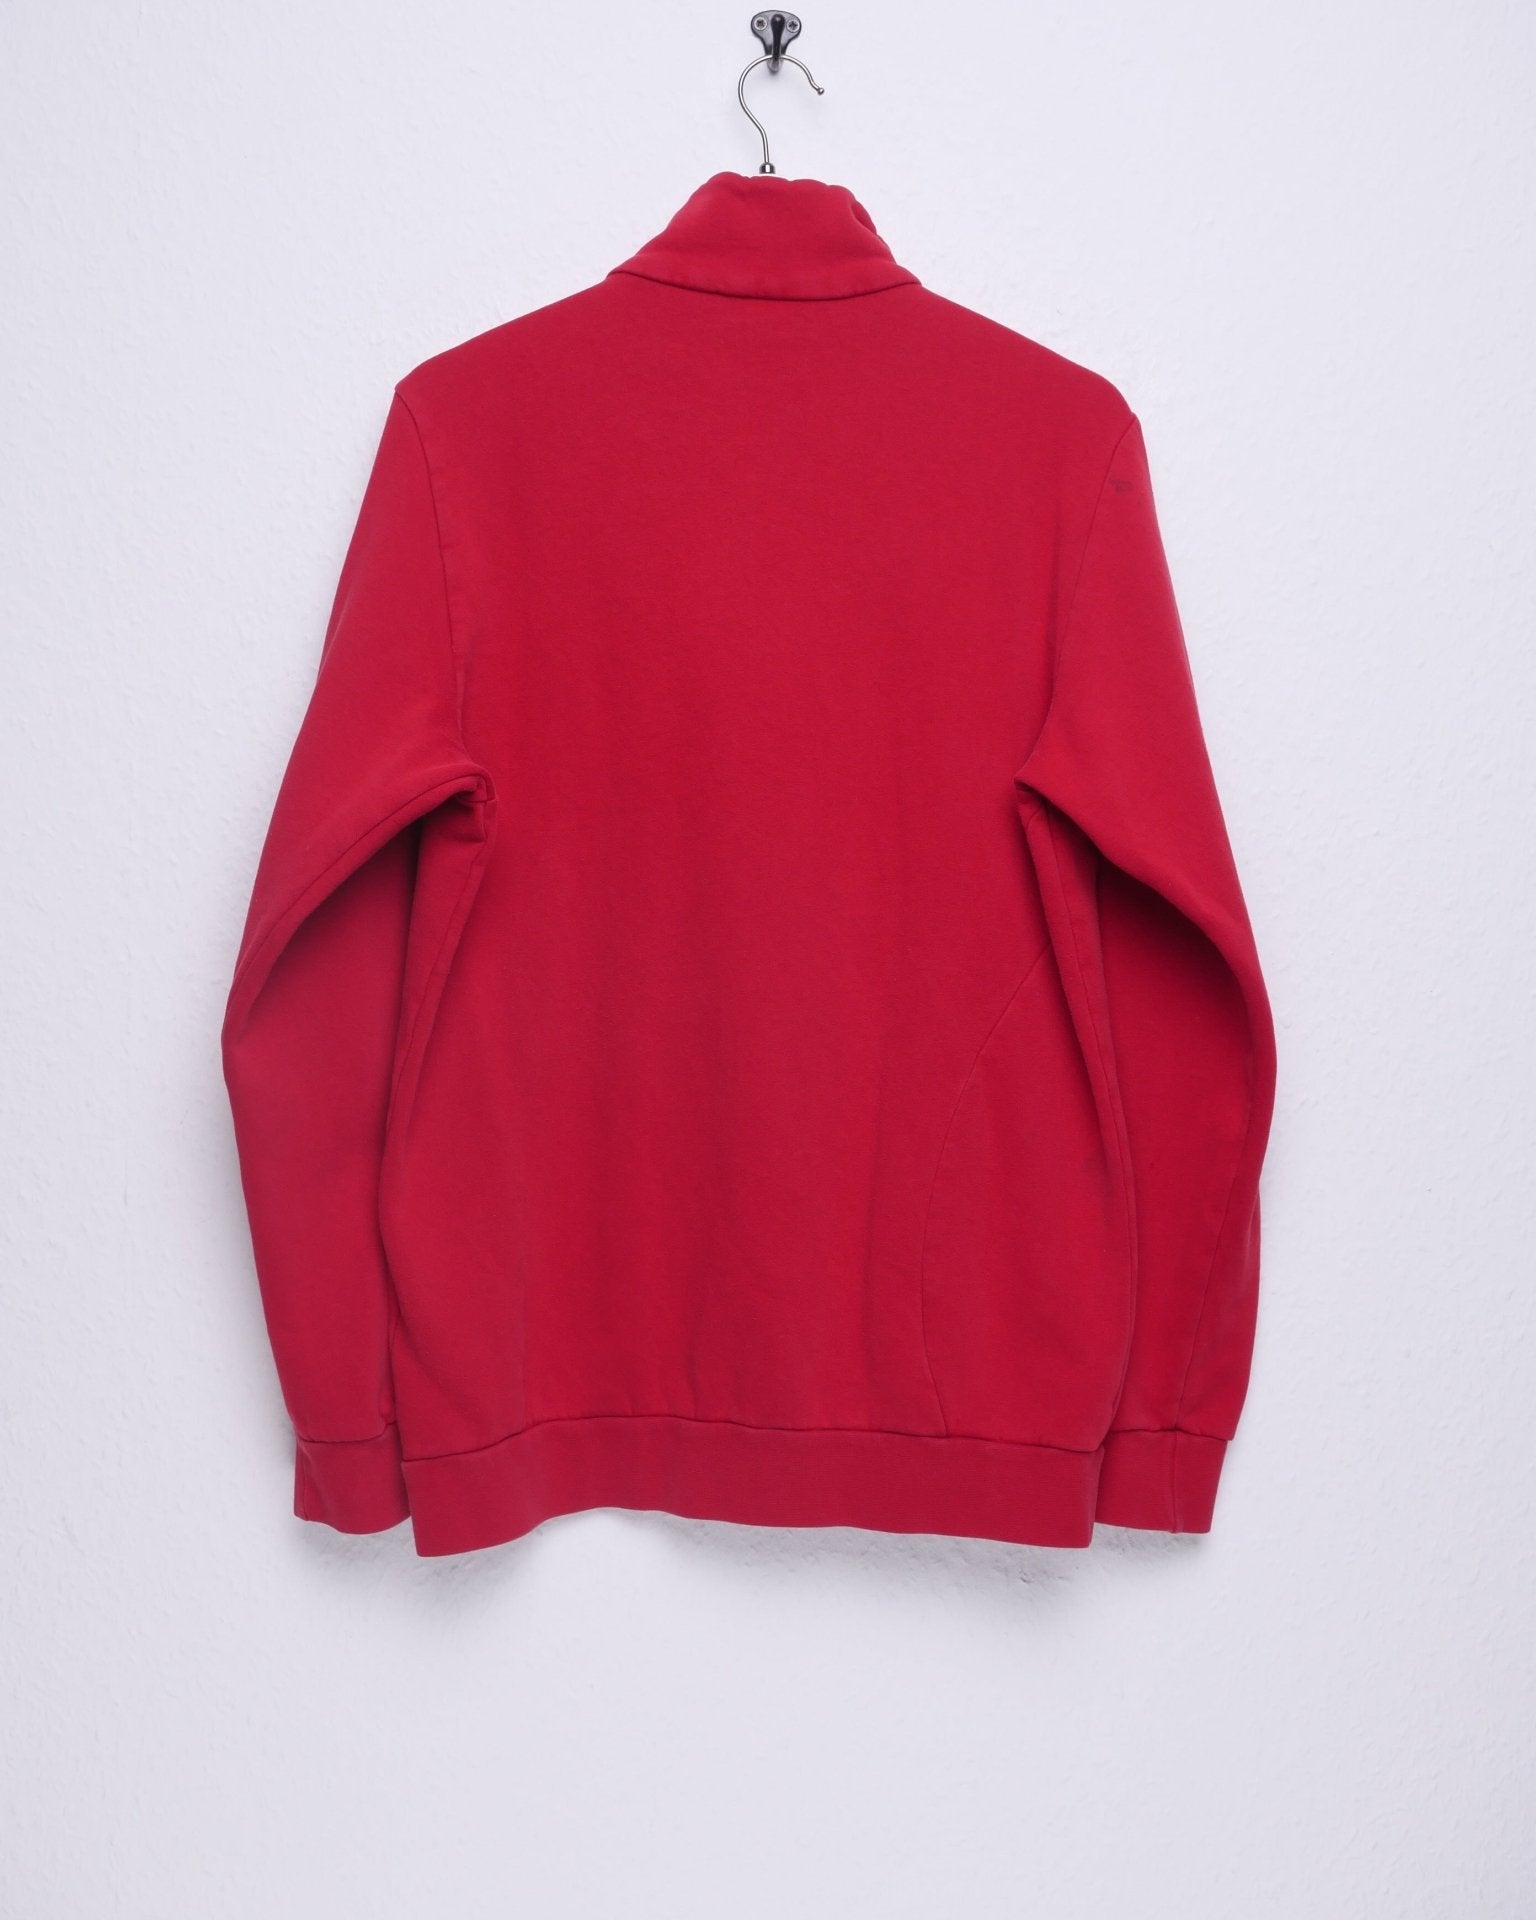 adidas embroidered Logo red Half Zip Sweater - Peeces